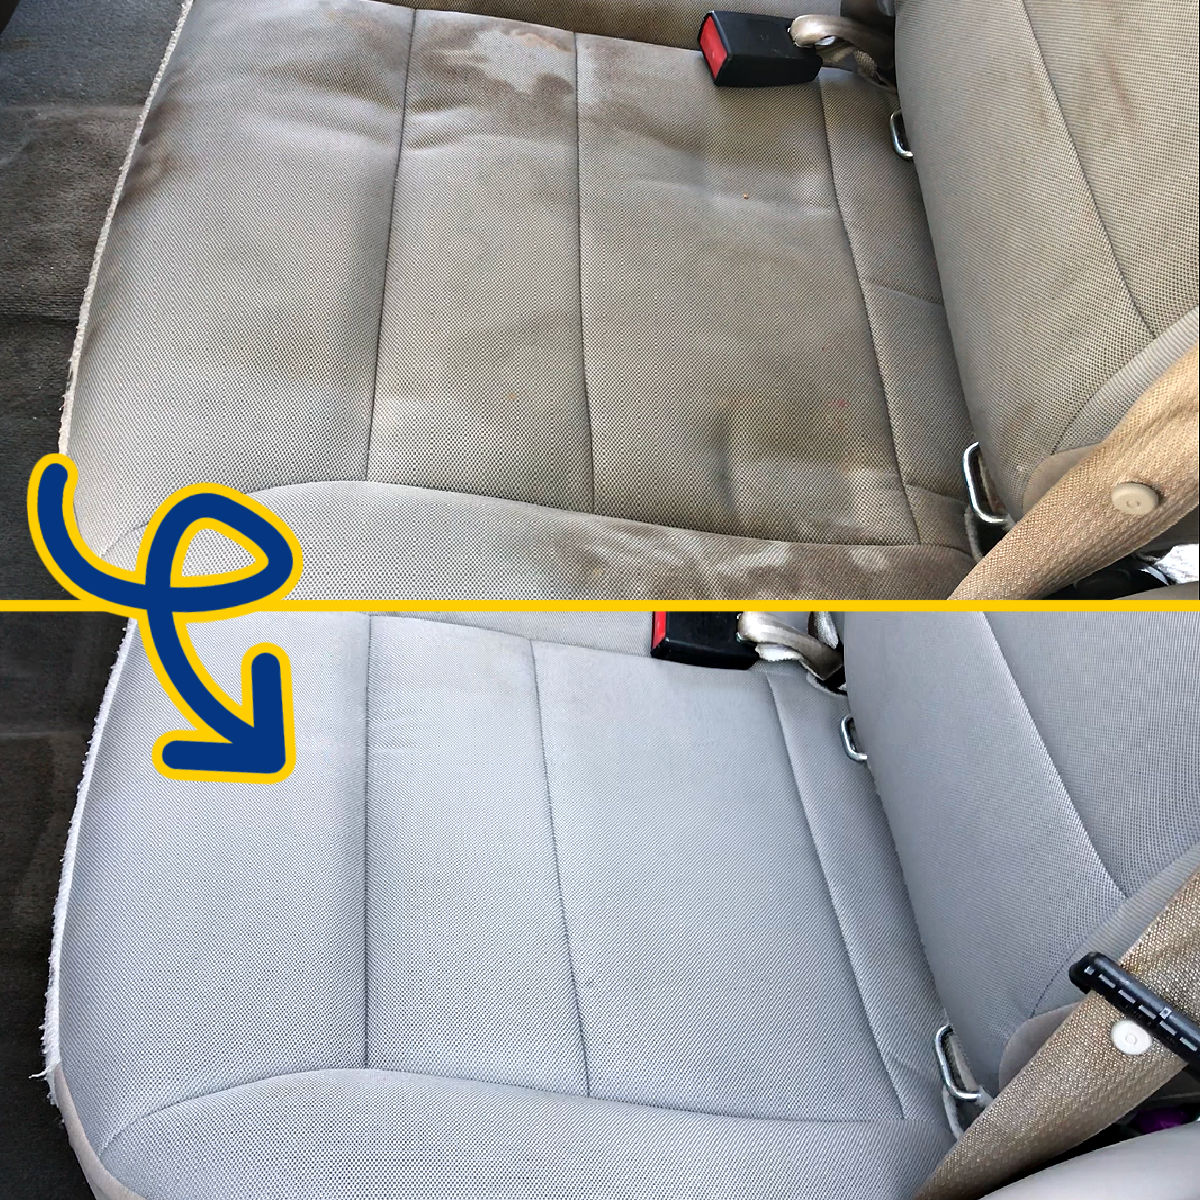 What is the best product to clean car seat upholstery? - Quora